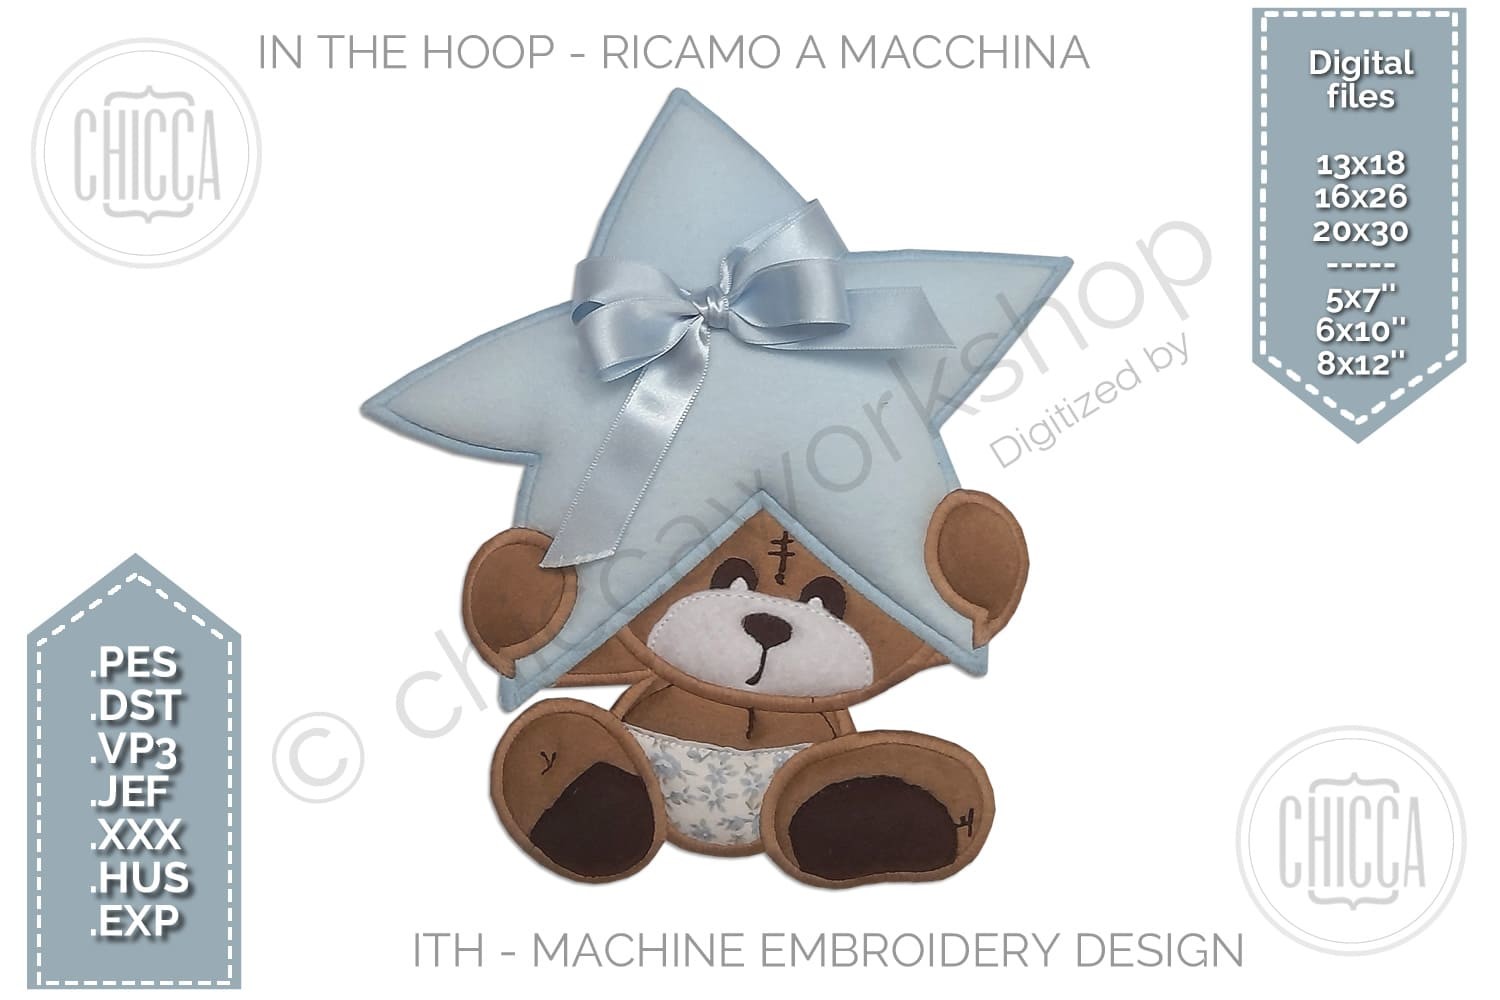 ITH Teddy Angel Cot Mobile Machine Embroidery Design With 